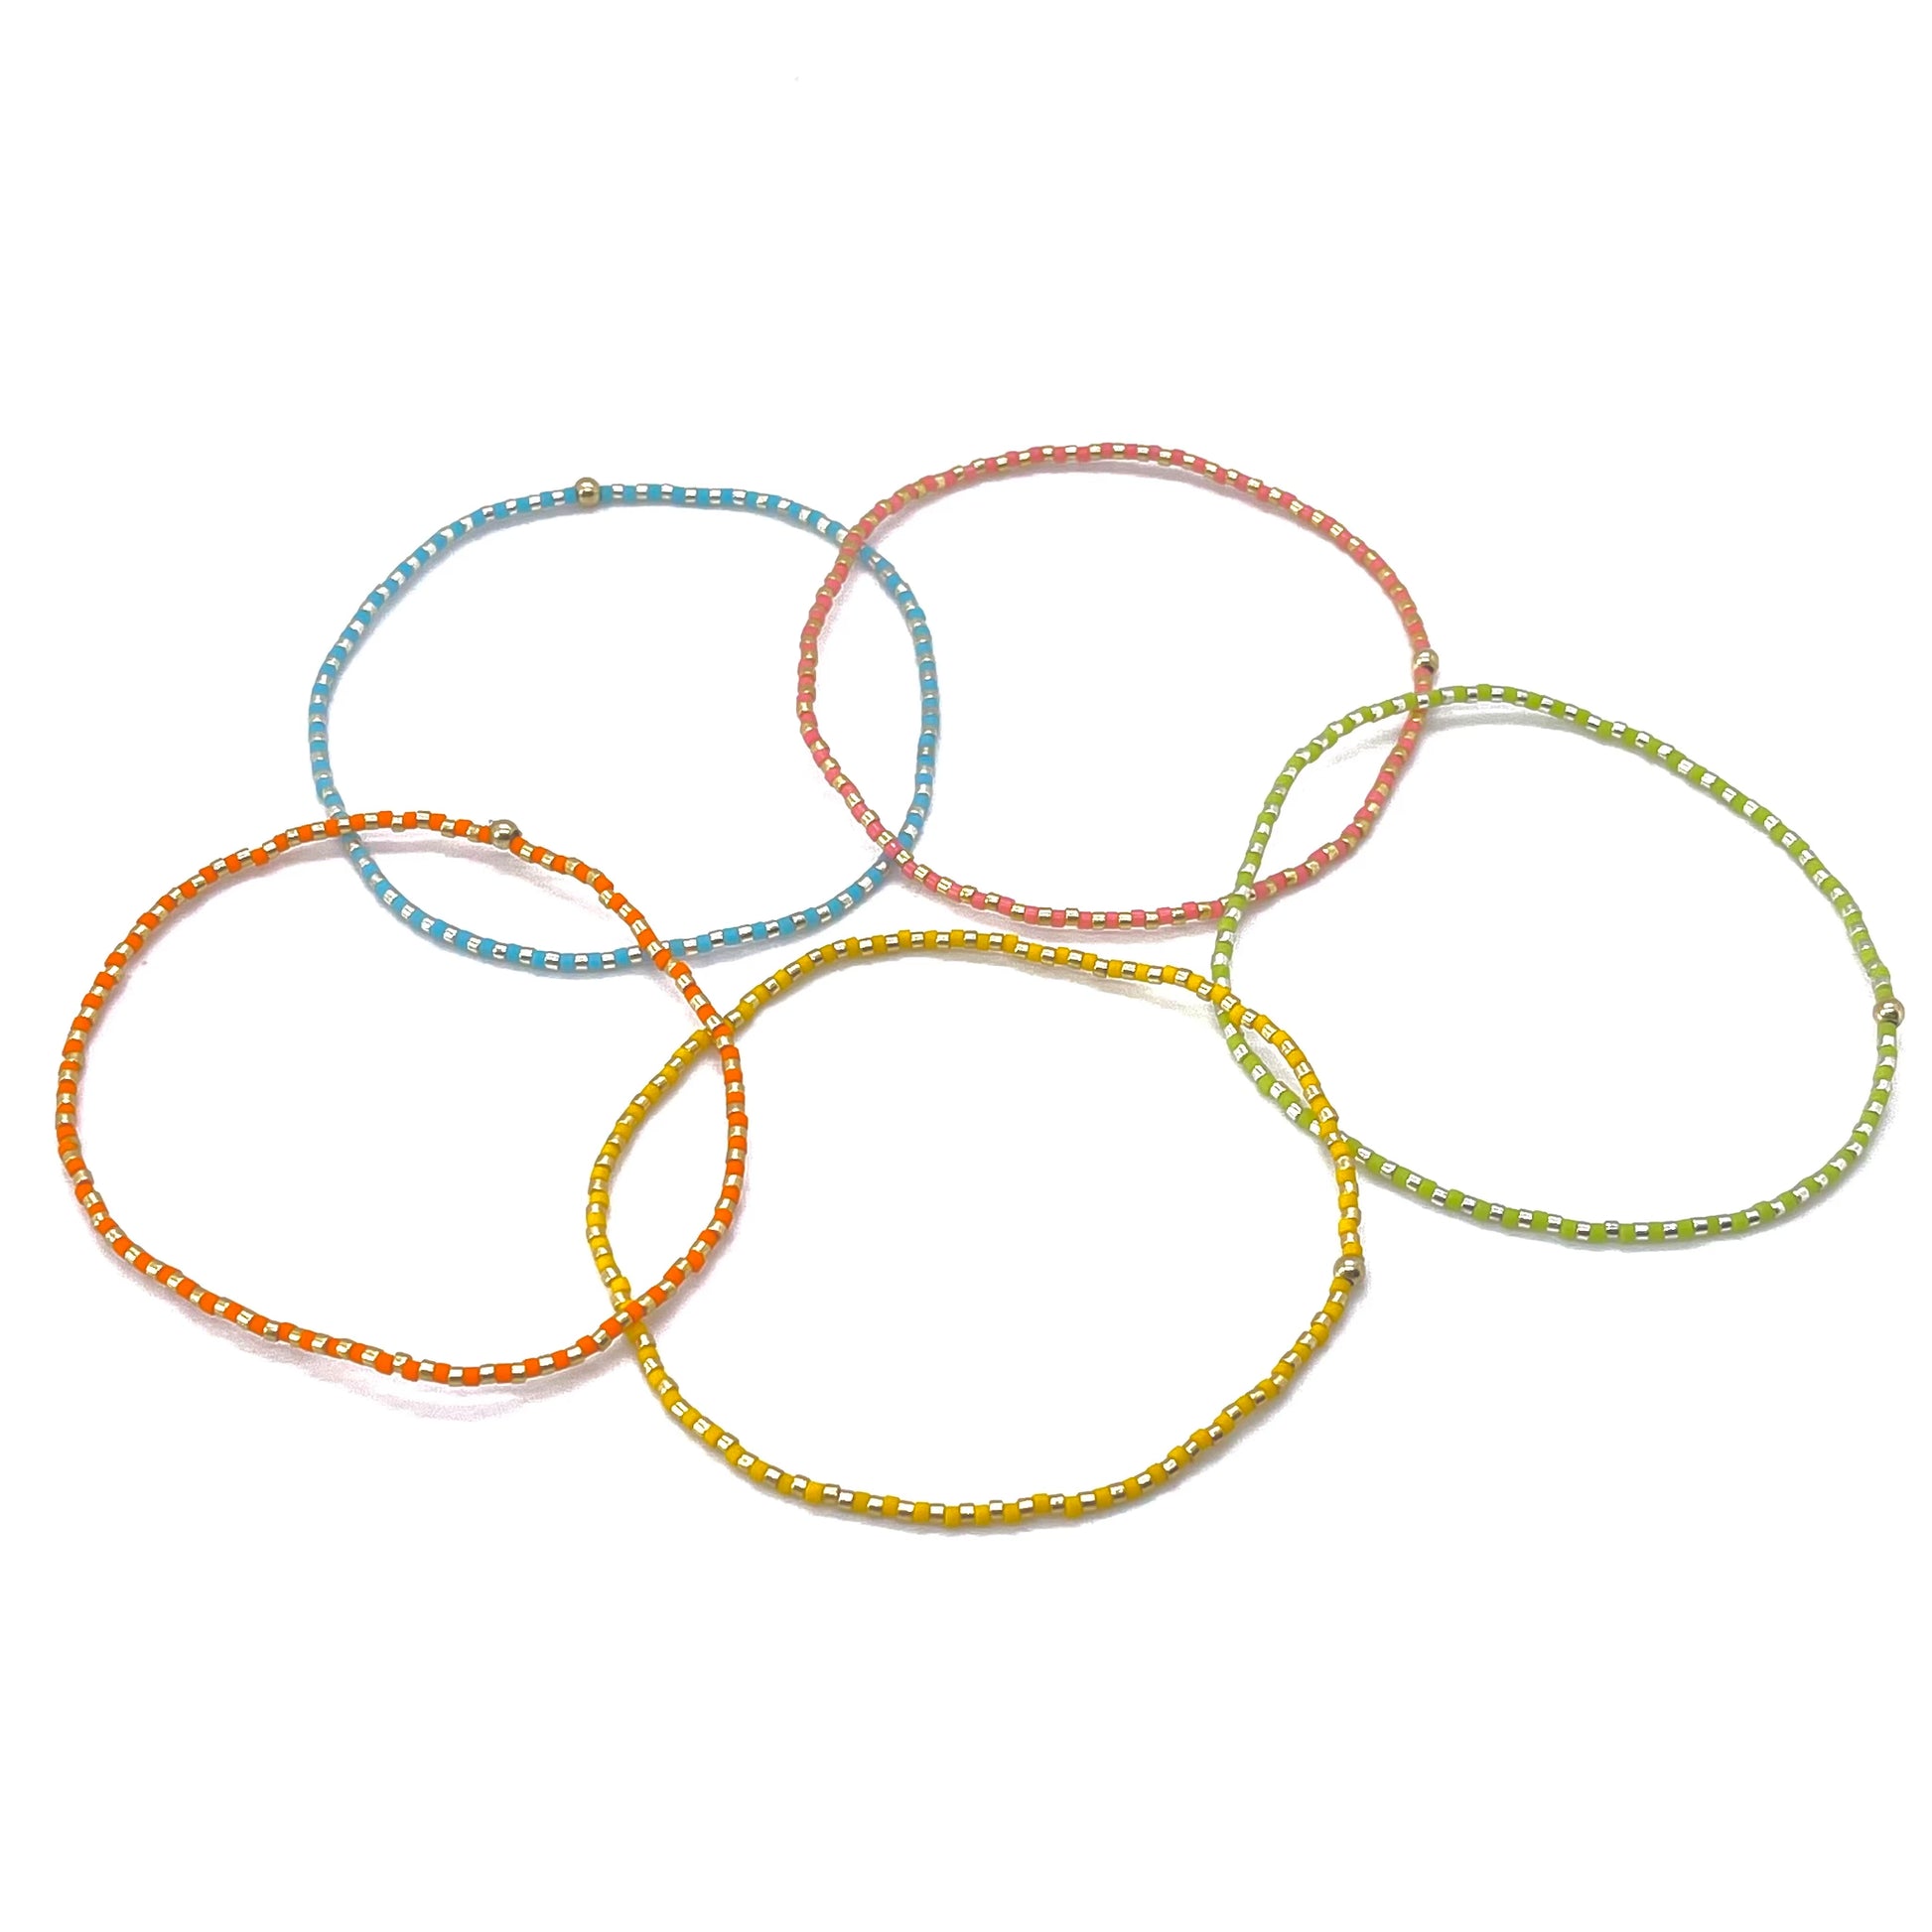 Seed bead anklets in tuttie frutti colors. Fun, stretch ankle bracelets in summer colors.